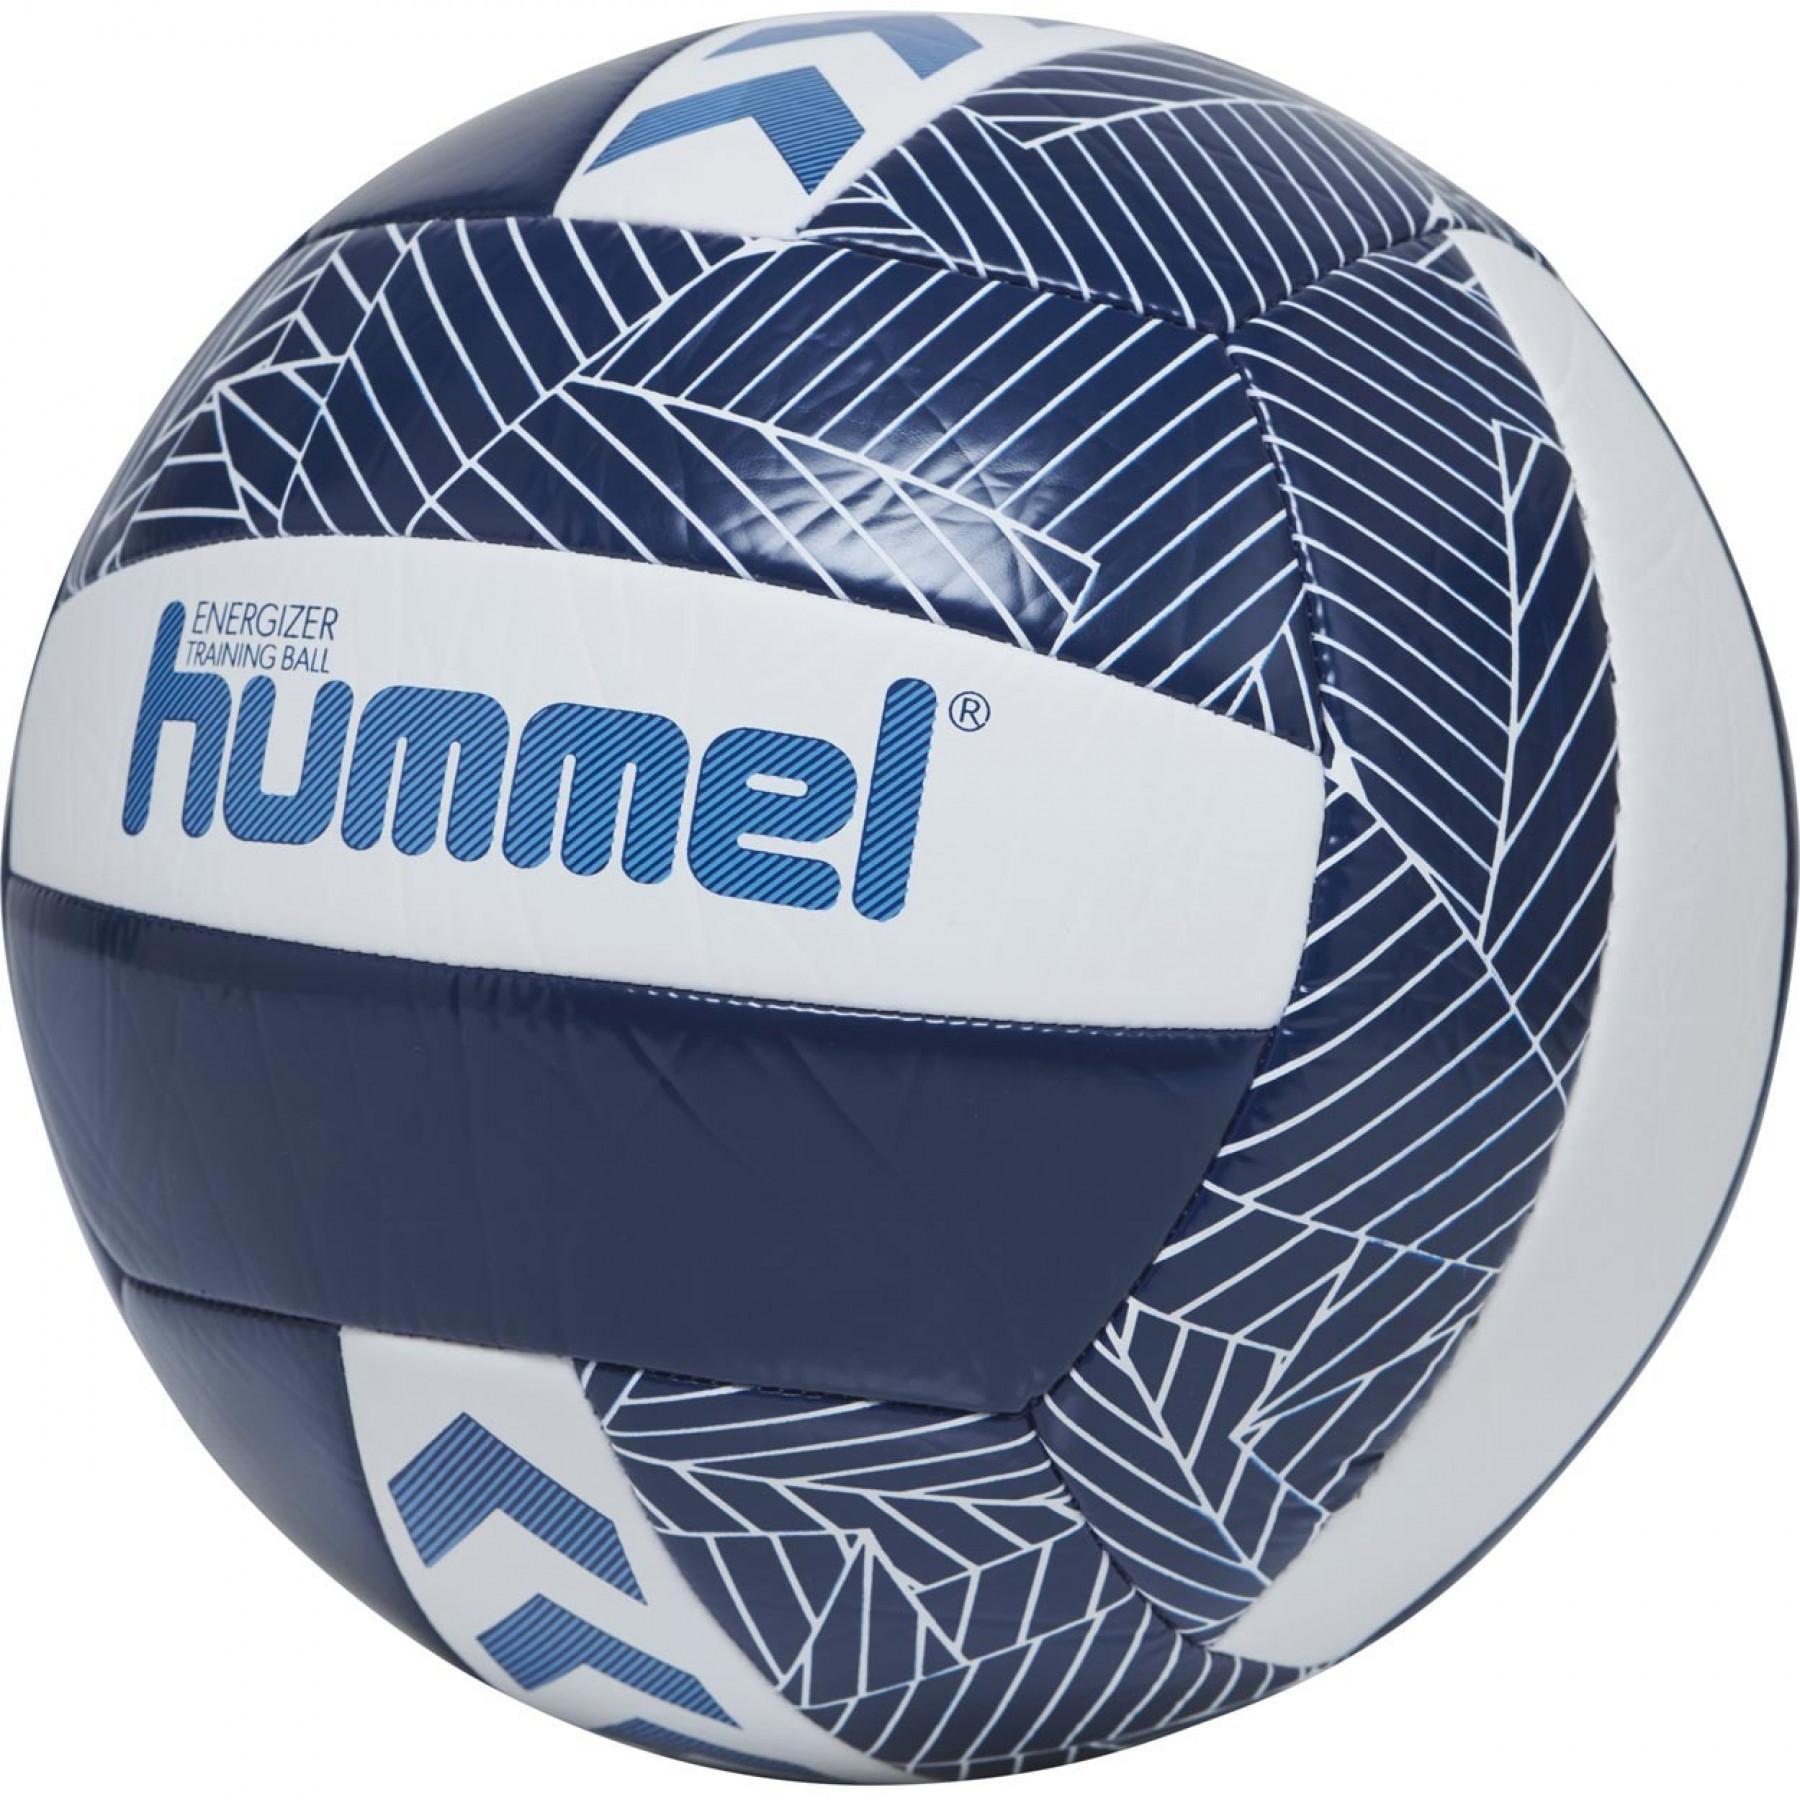 Set of 3 volleyballs Hummel Energizer [Taille5]